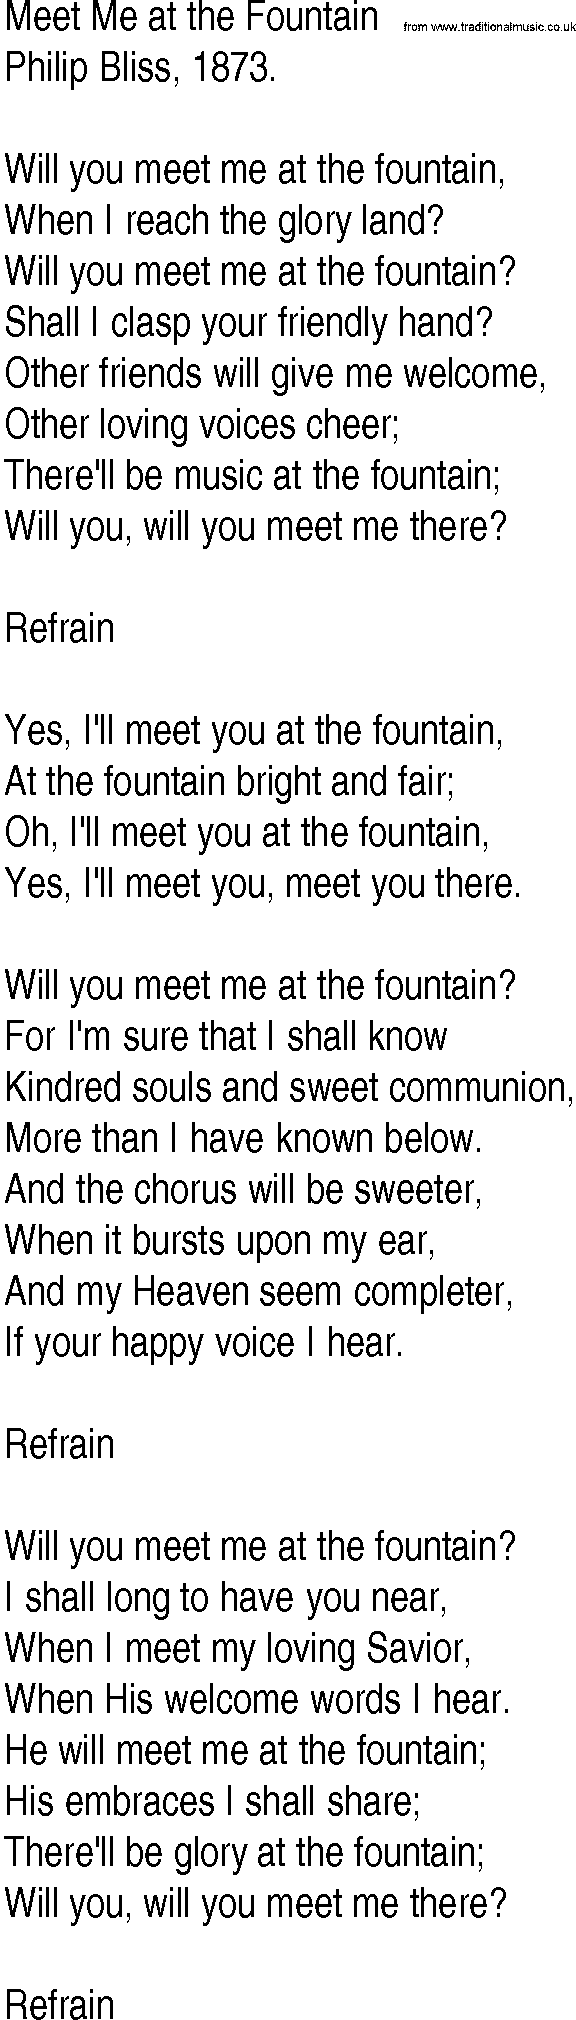 Hymn and Gospel Song: Meet Me at the Fountain by Philip Bliss lyrics